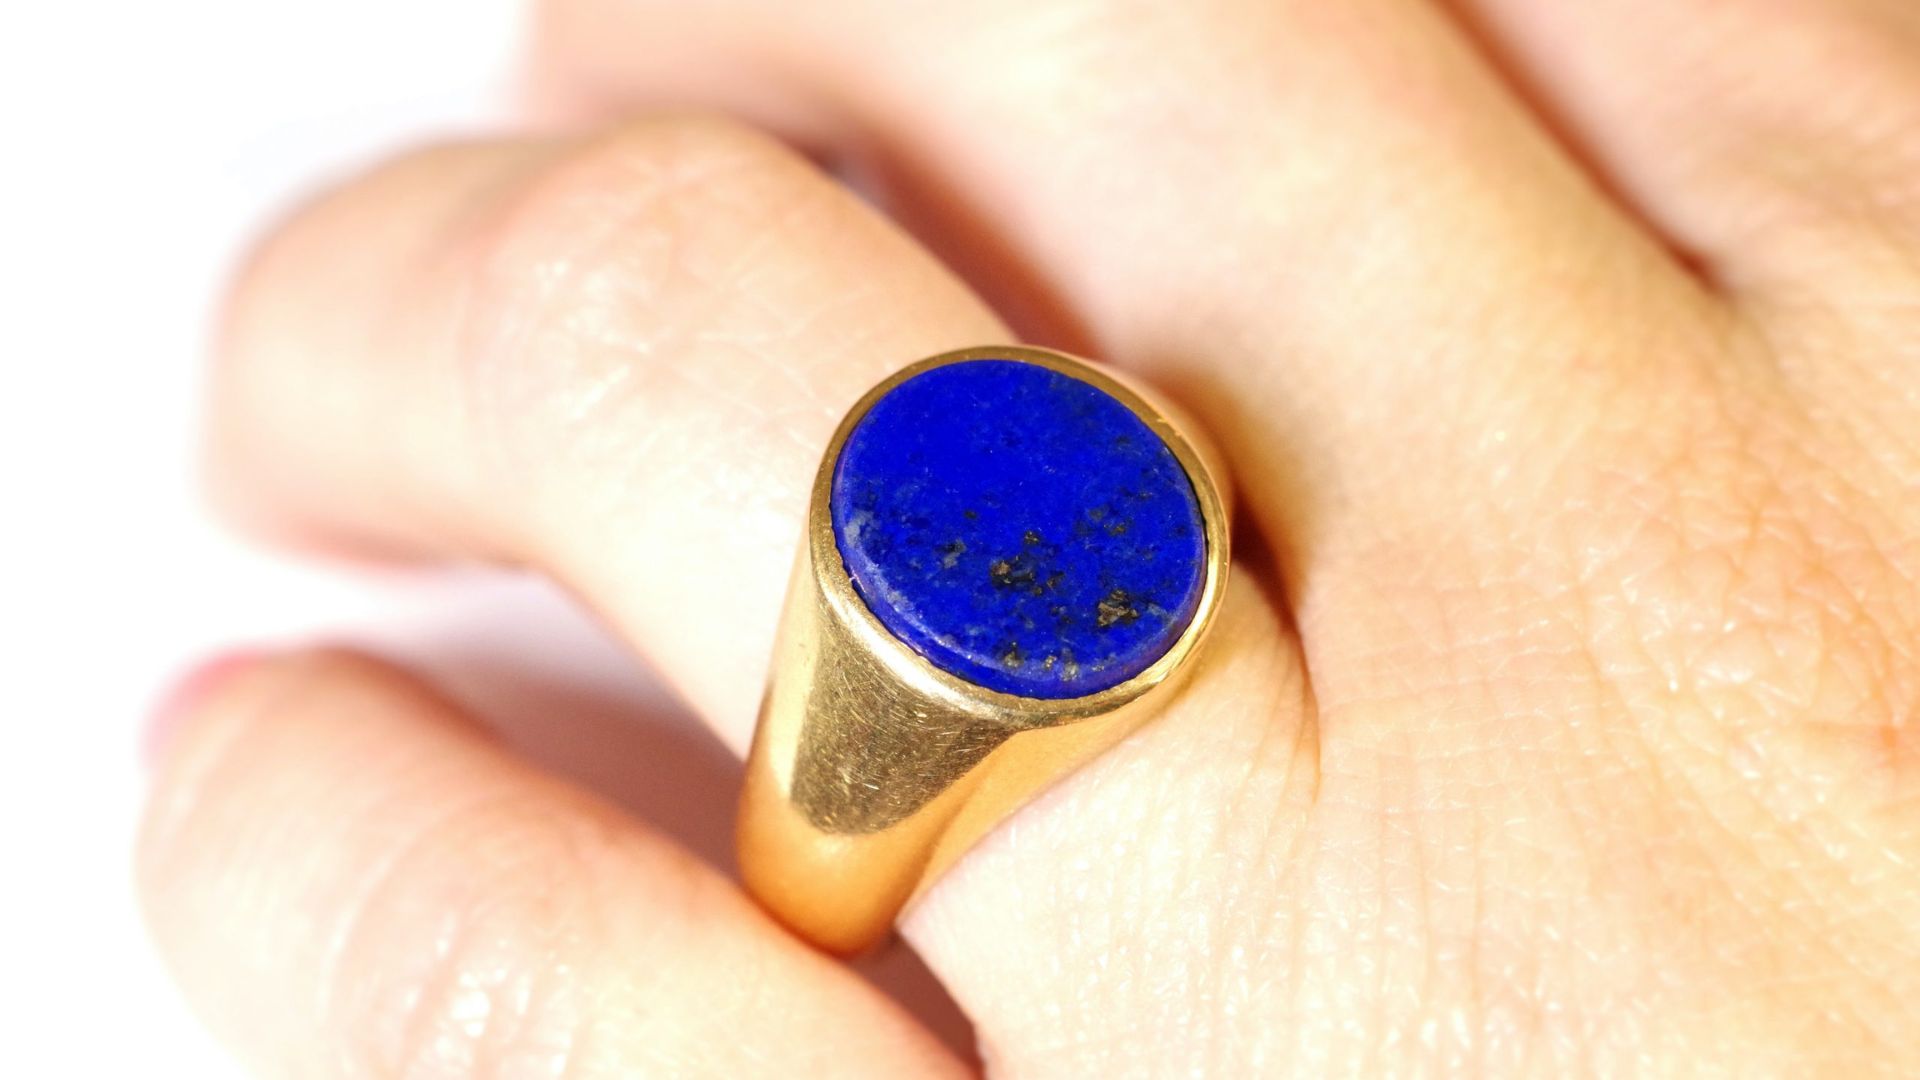 Lapis Lazuli Rings - A Guide To This Beautiful Blue Gemstone